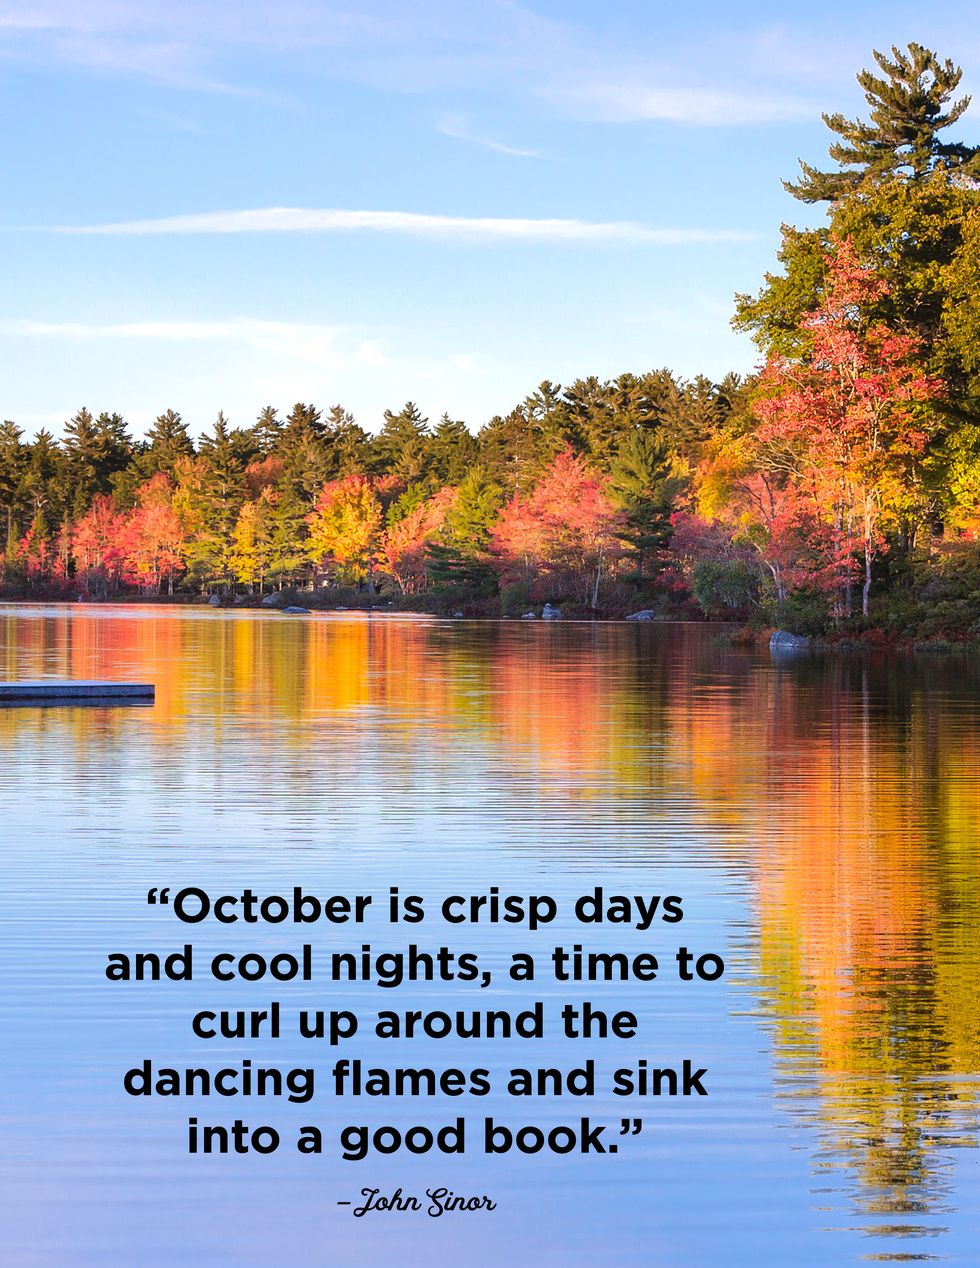 25 October Quotes - Famous Sayings and Quotes about October